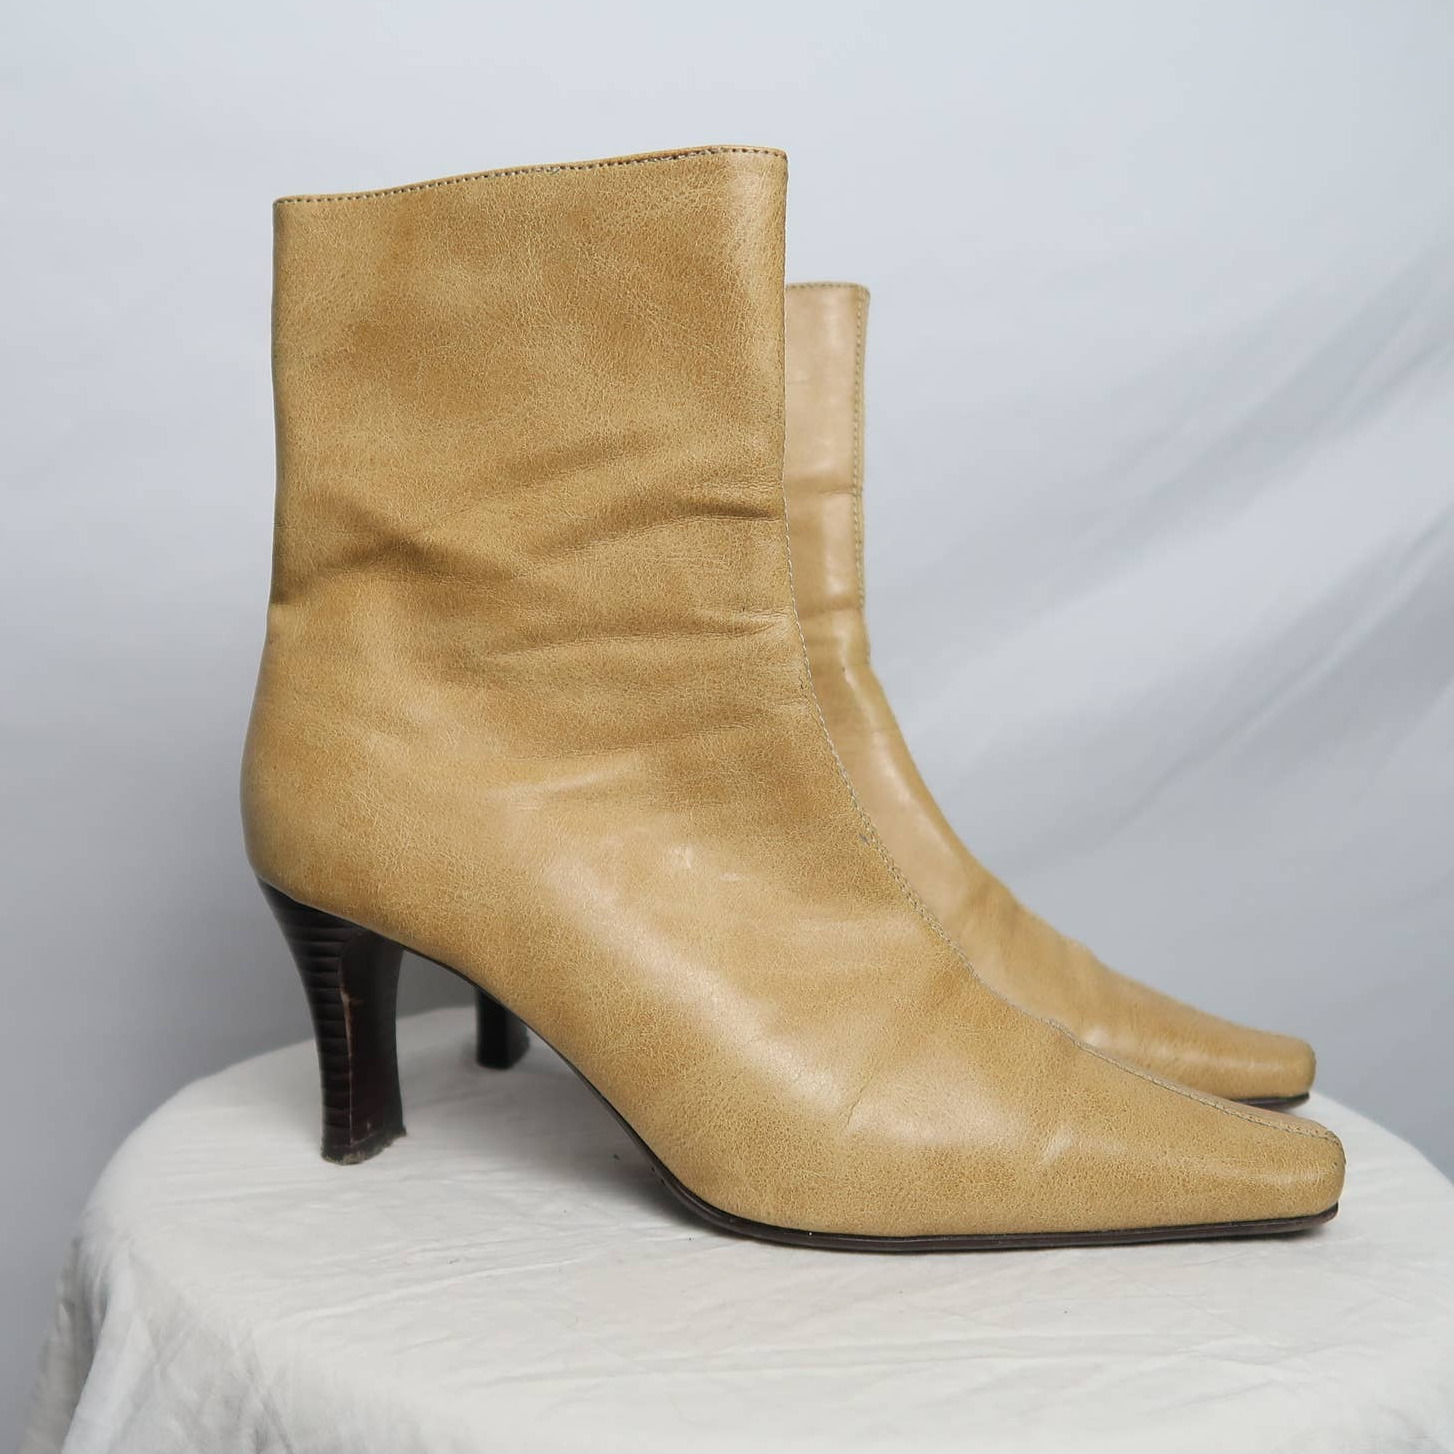 Vintage 90s Lei Light Tan Faux Leather Square Toe Ankle Boots 6